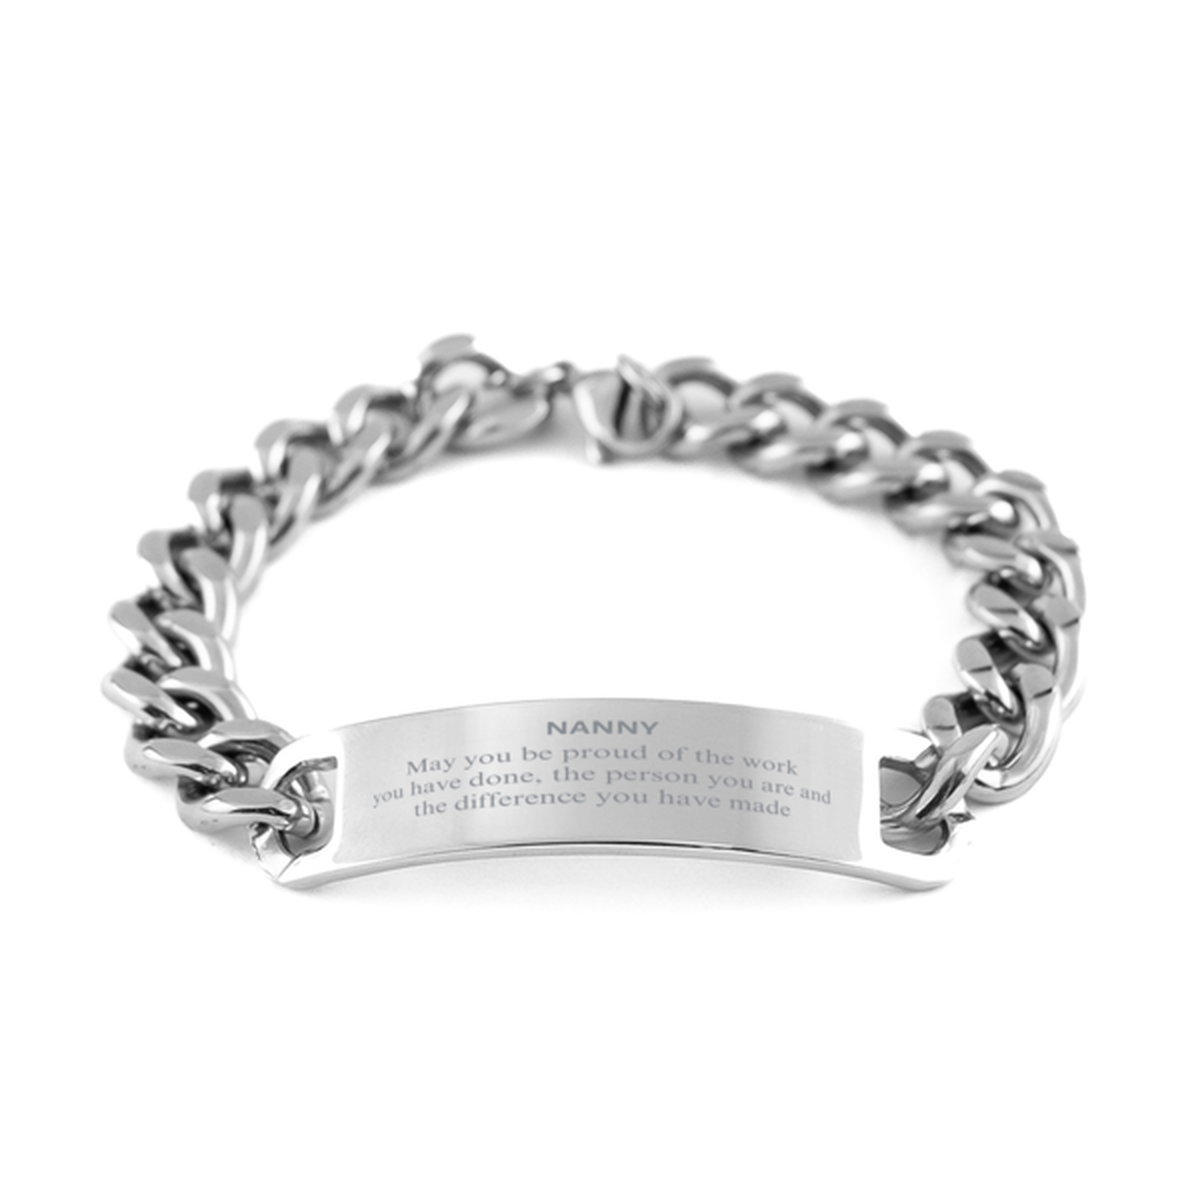 Nanny May you be proud of the work you have done, Retirement Nanny Cuban Chain Stainless Steel Bracelet for Colleague Appreciation Gifts Amazing for Nanny